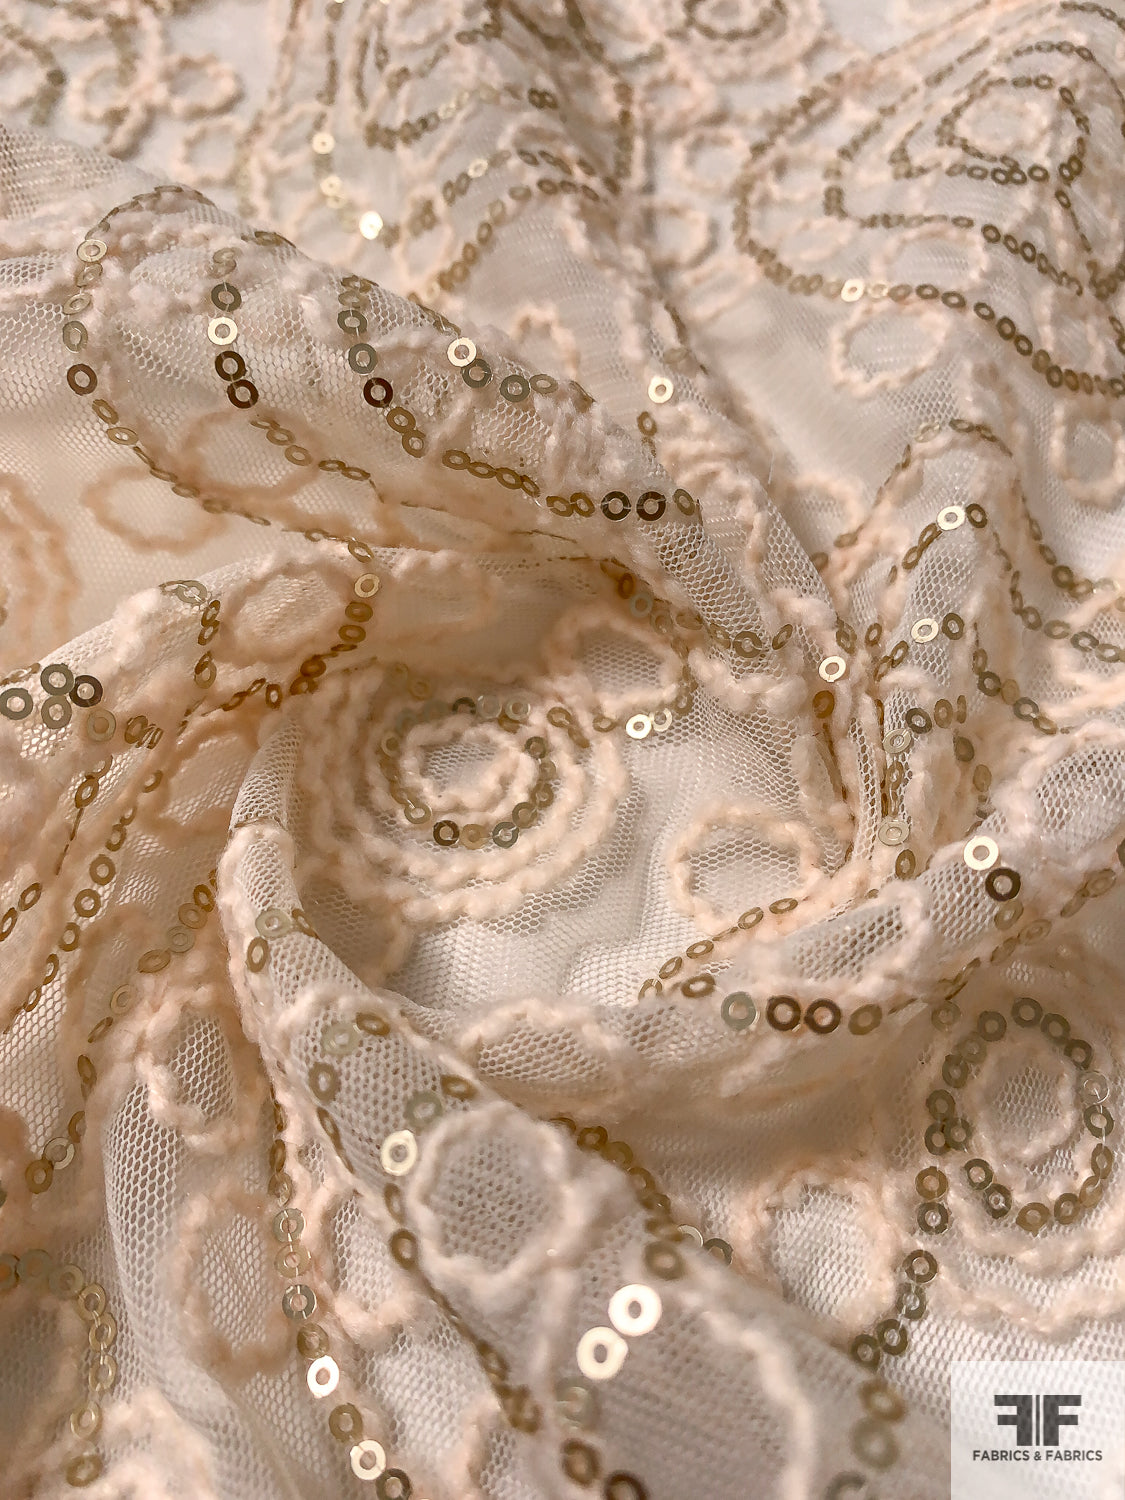 Netting with Circular Yarn Embroidery and Sequins - Ivory White